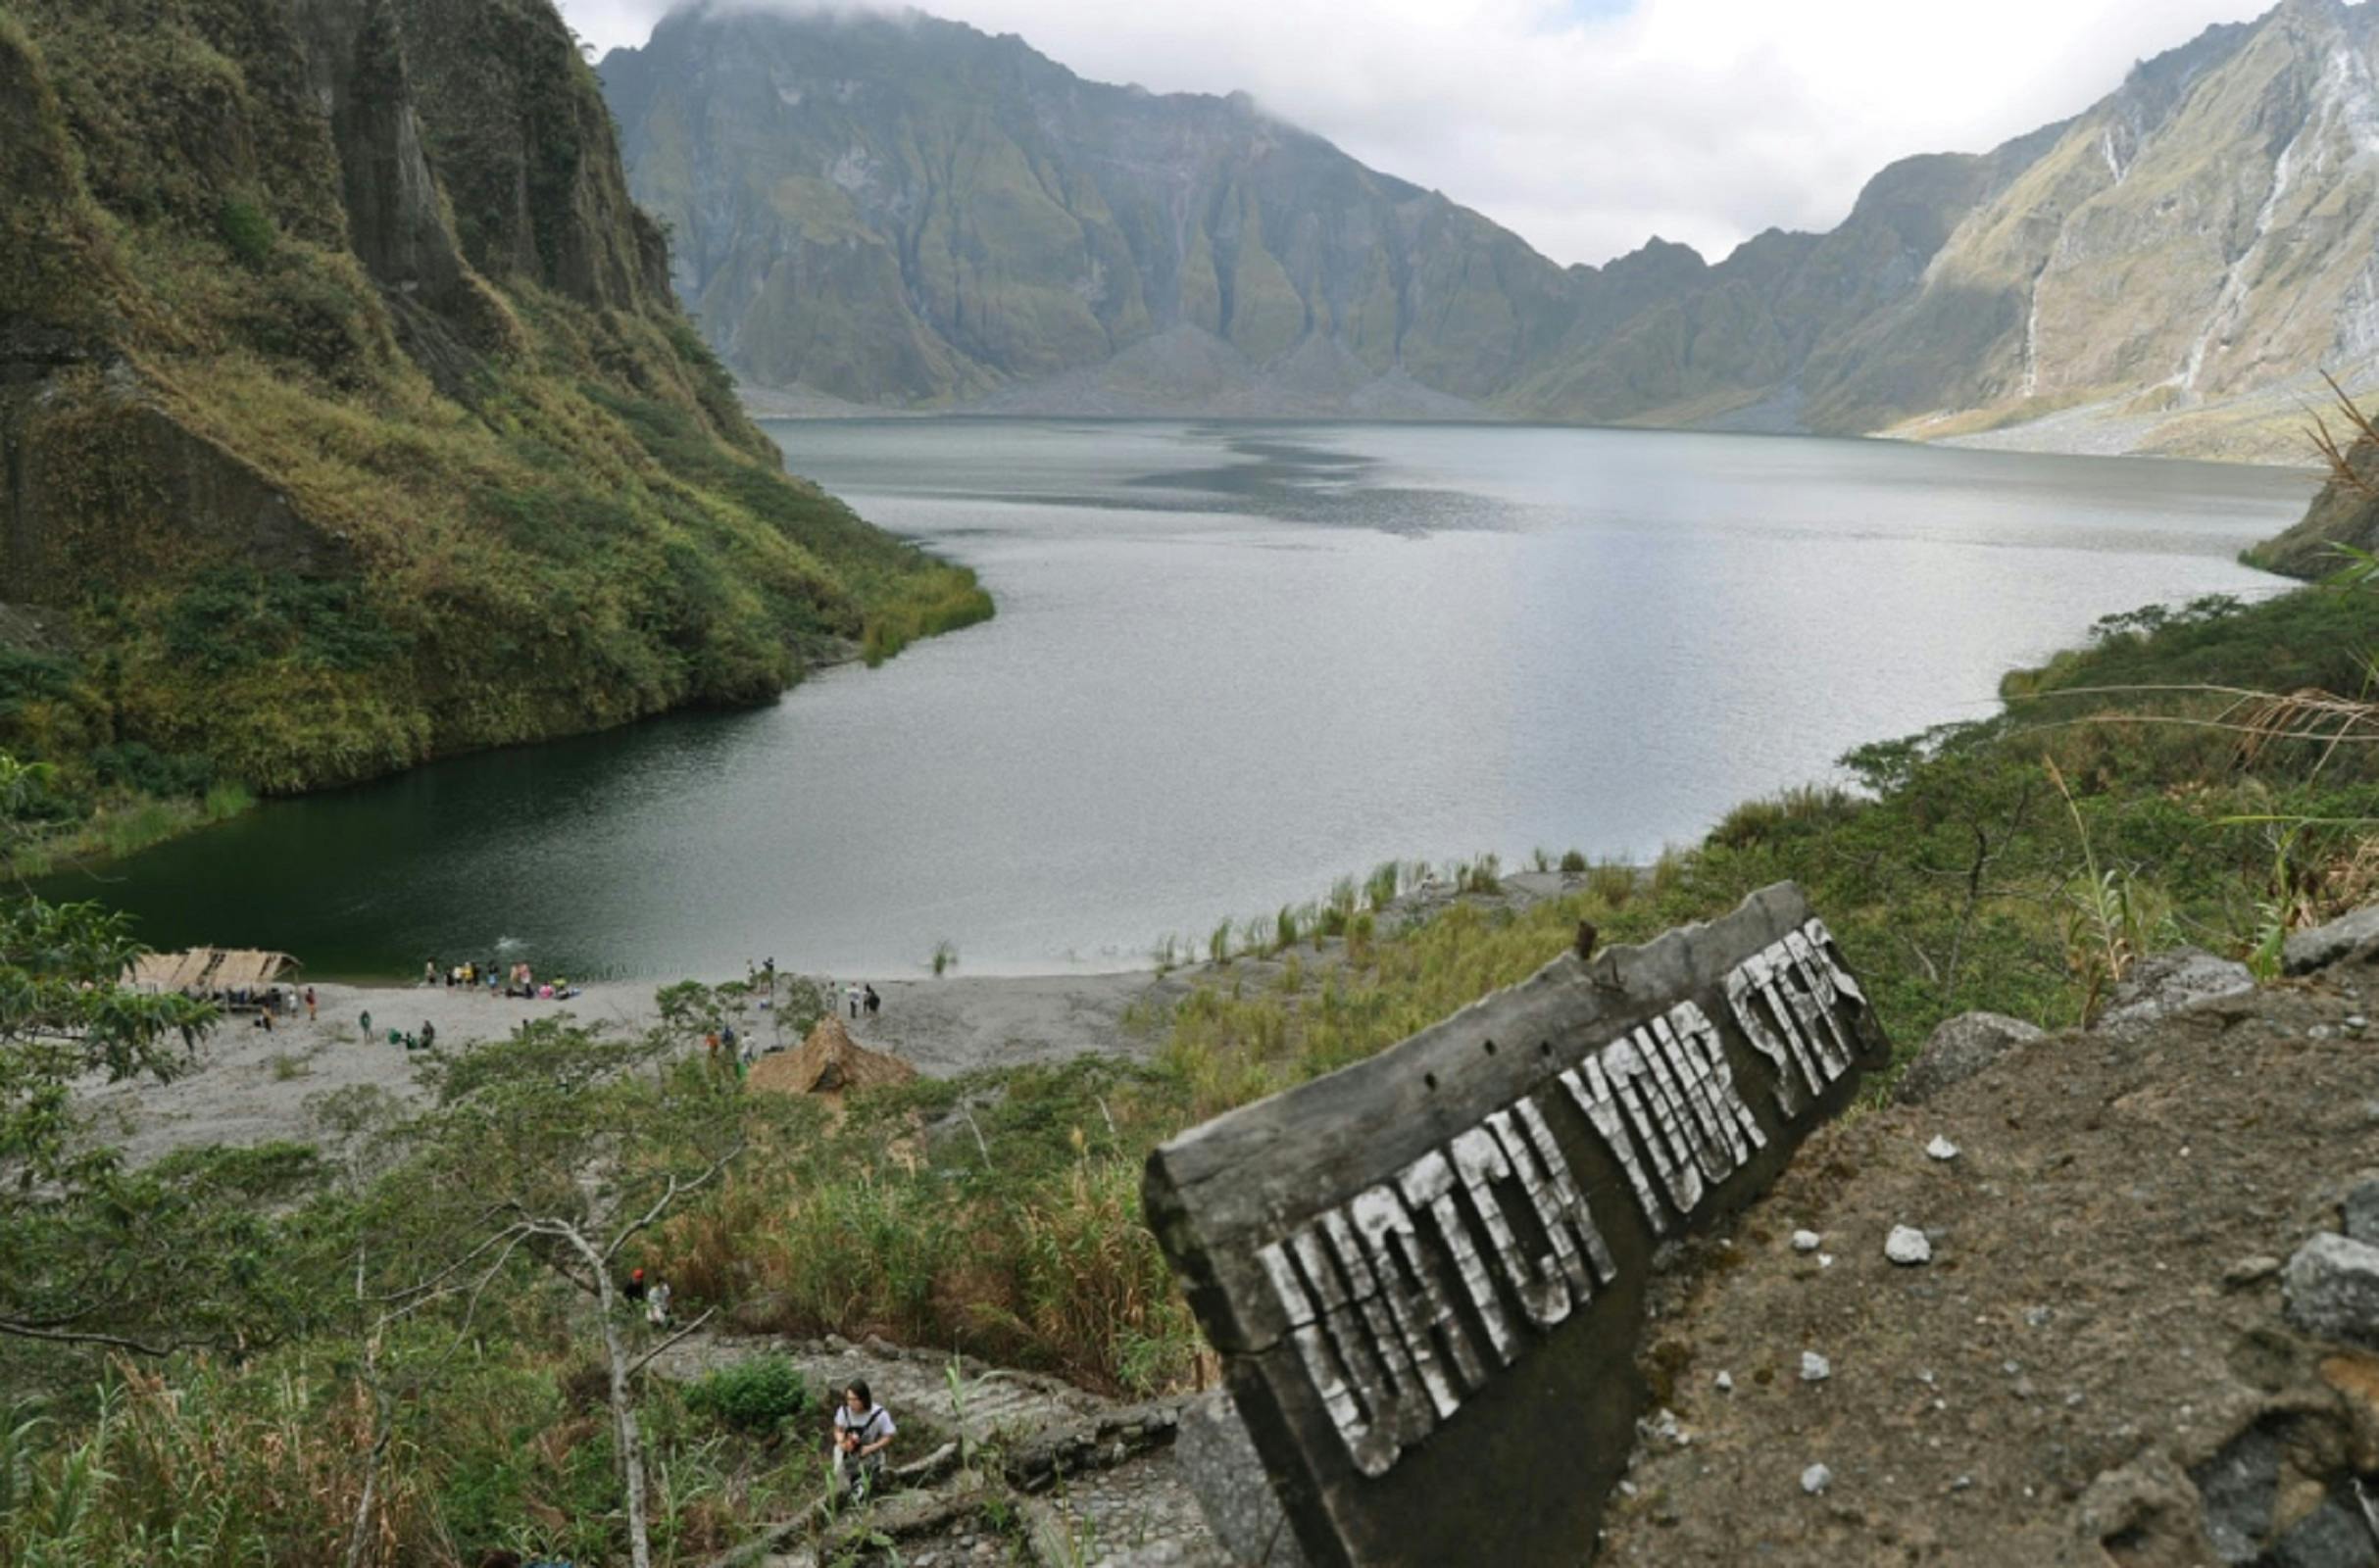 Guided Full Day Hike To Mt Pinatubo Crater Lake With 4x4 3248